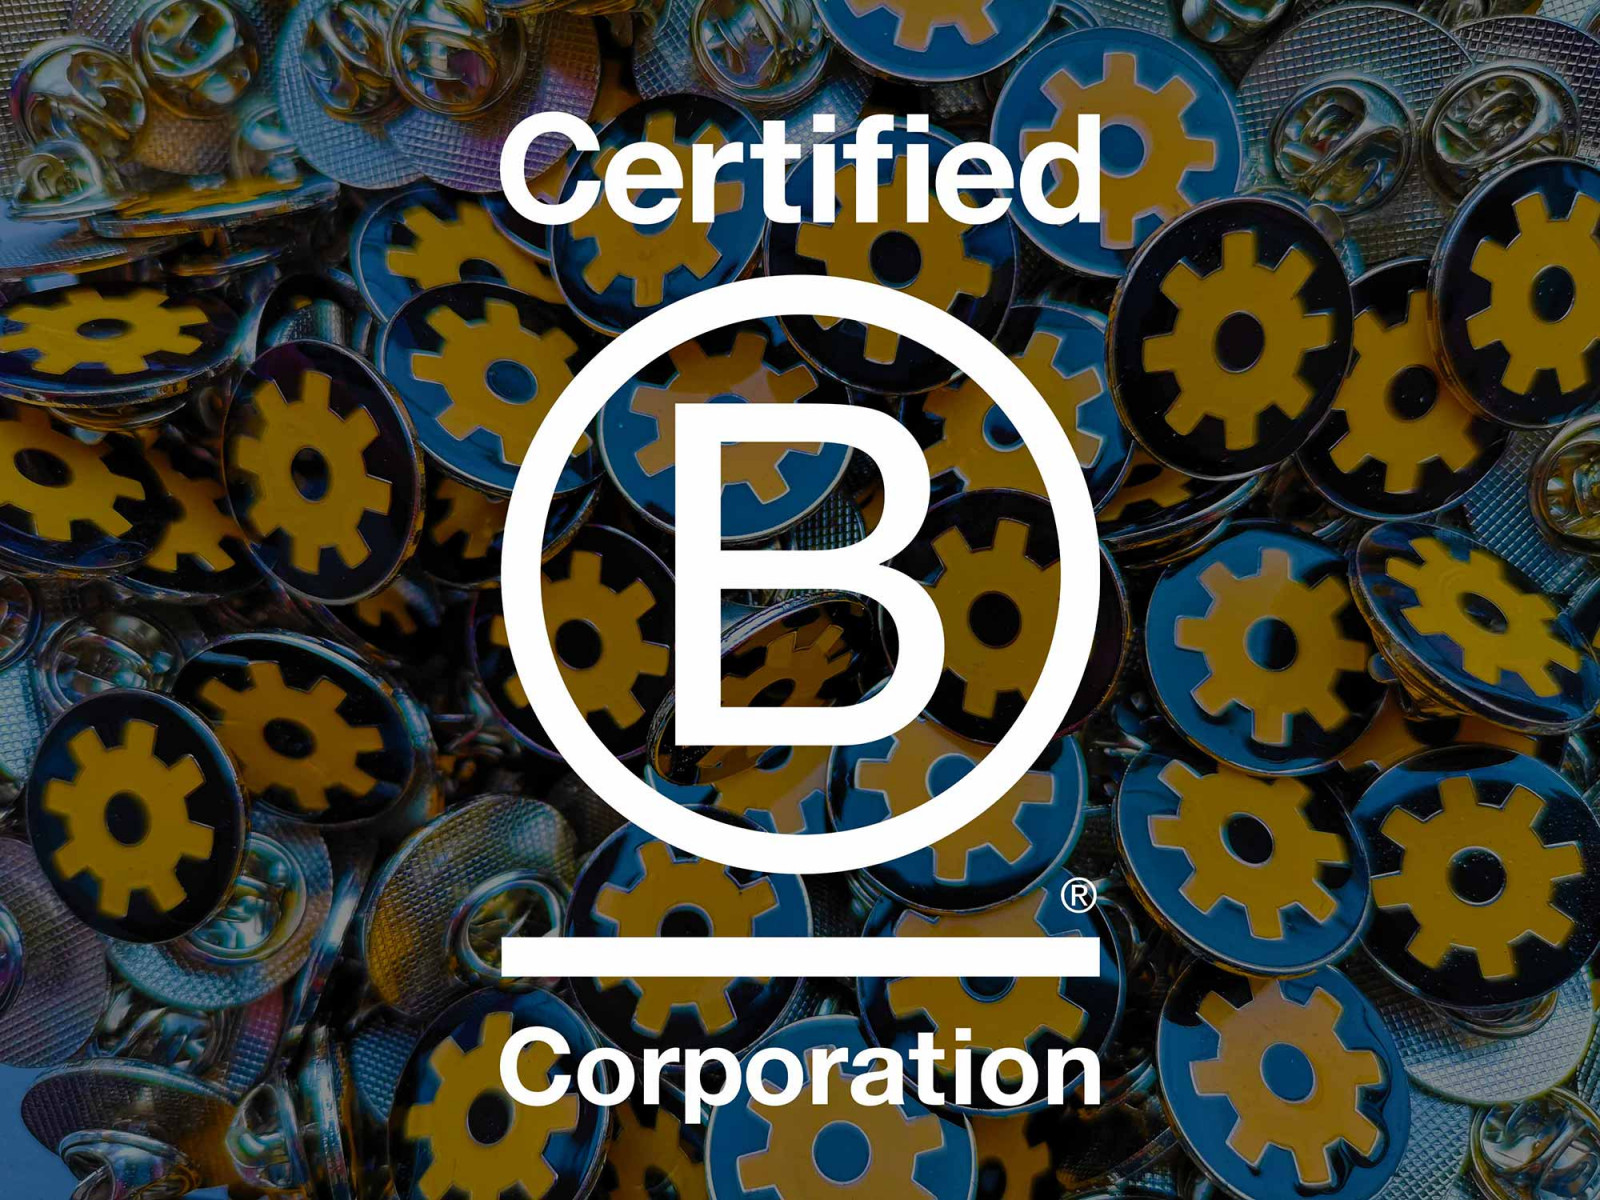 Cog is a B Corporation